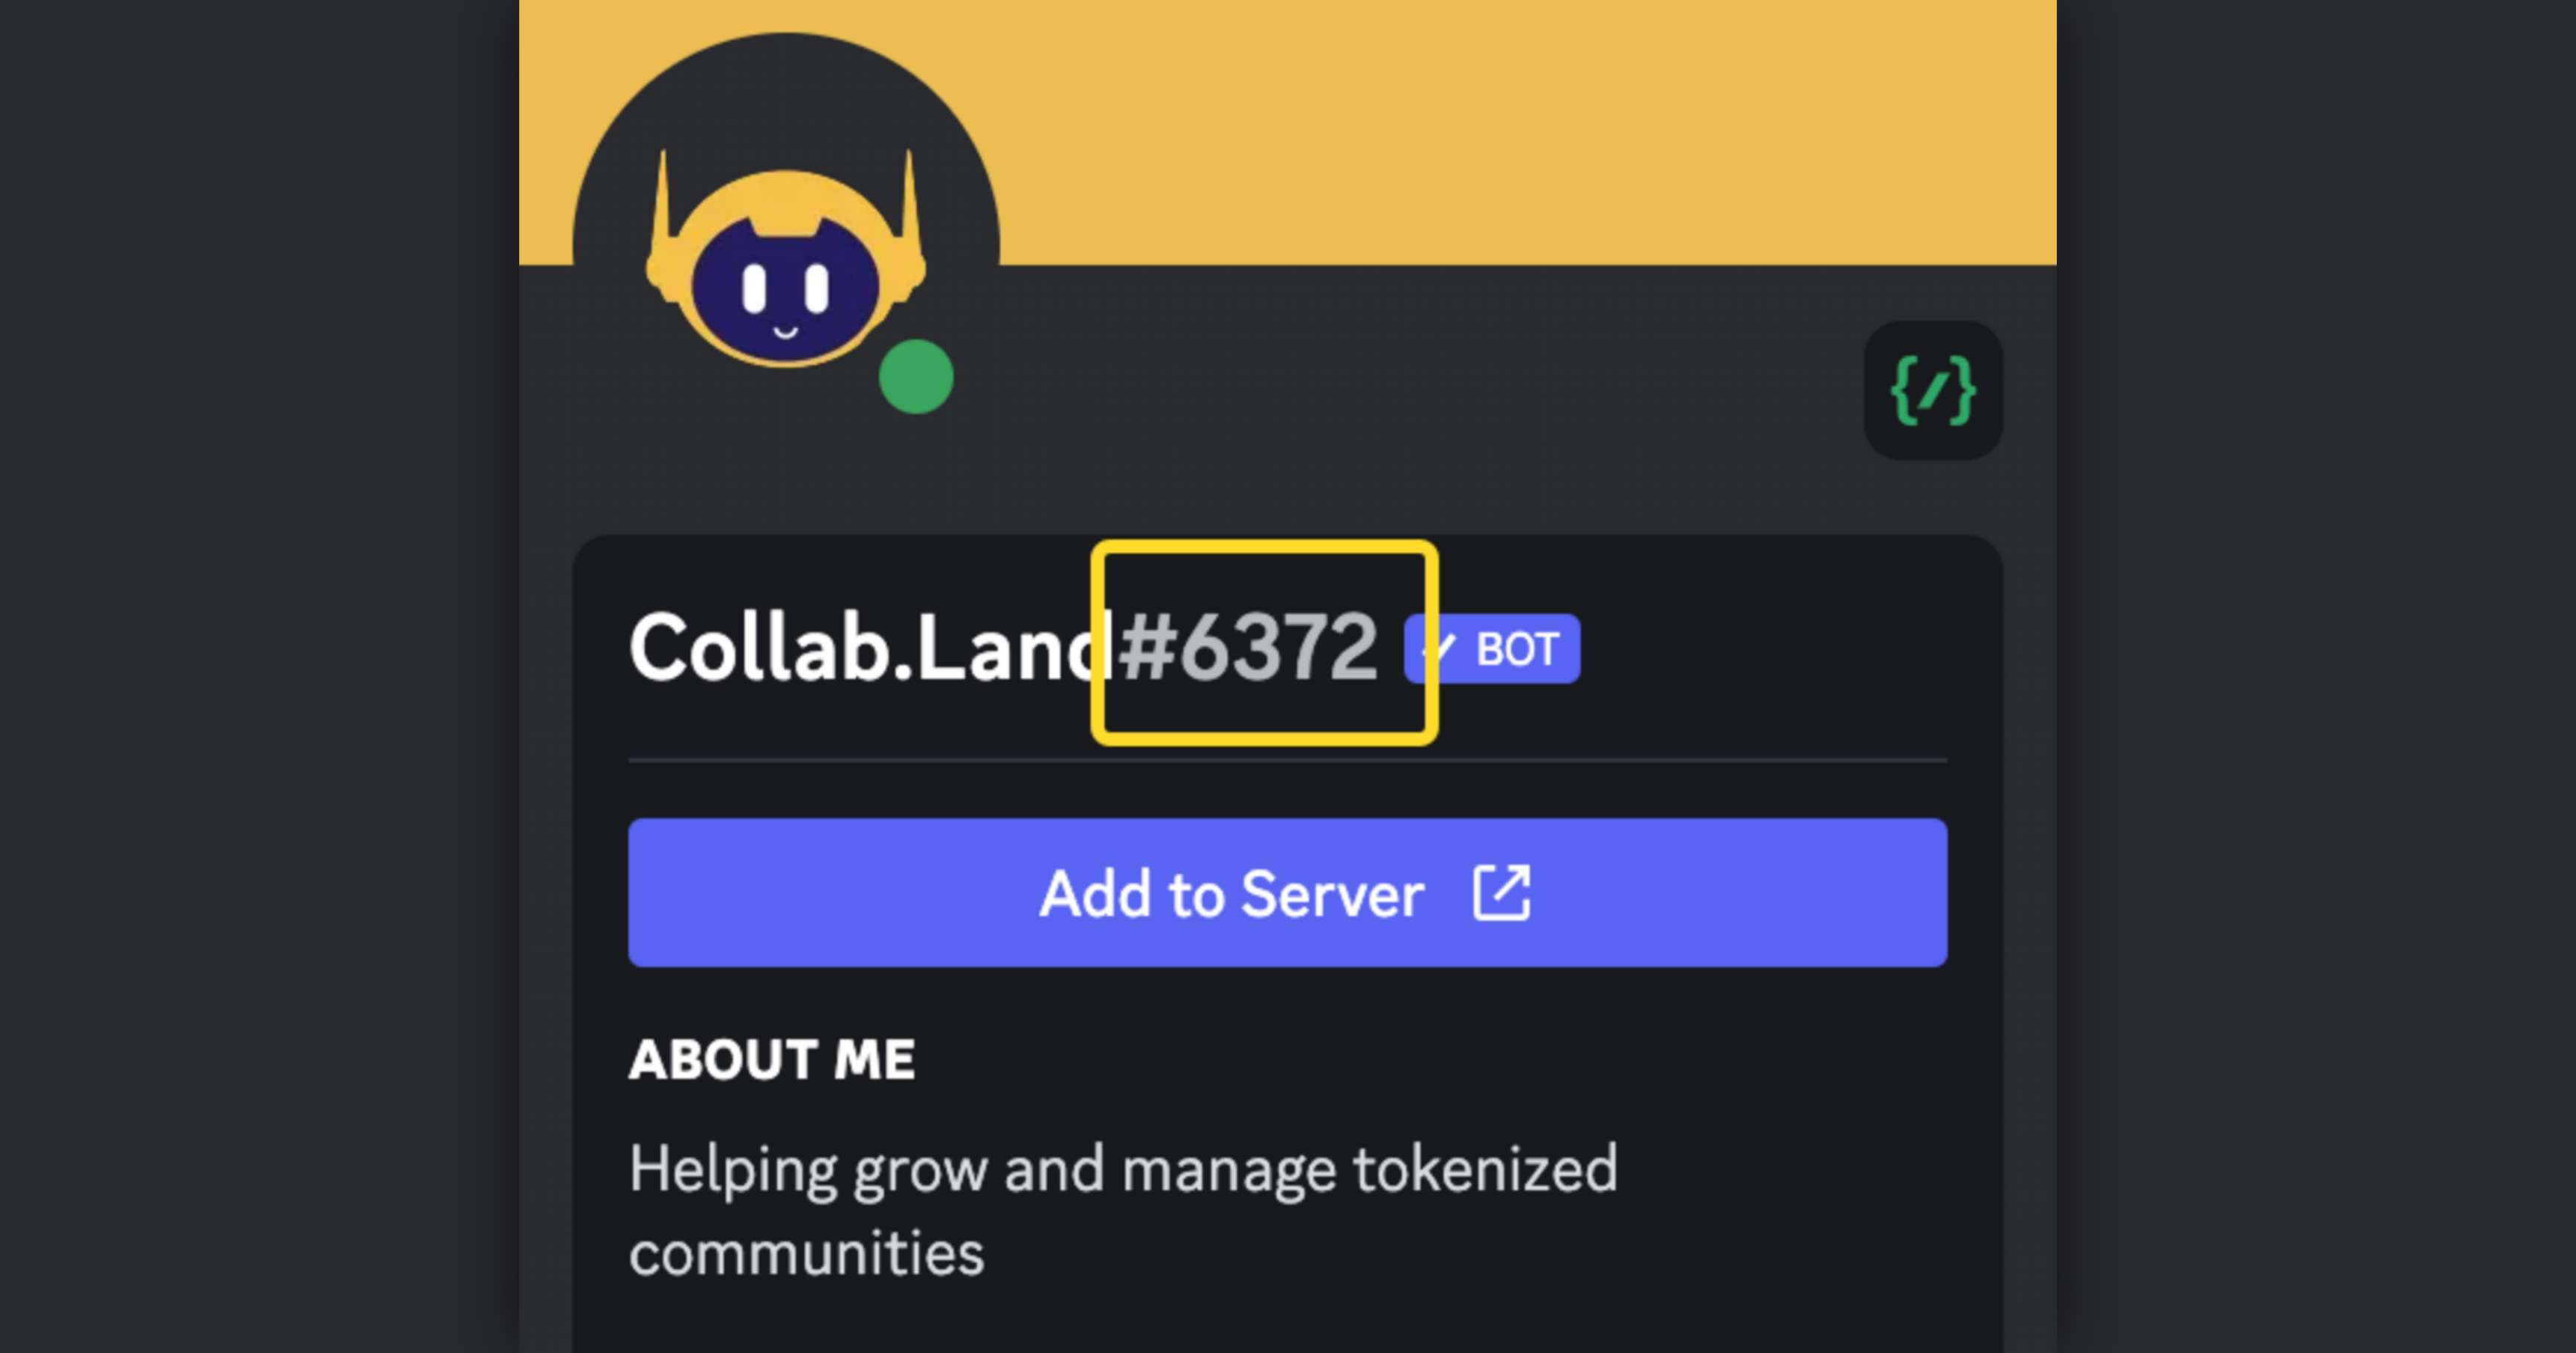 Official Collab.Land Discord bot